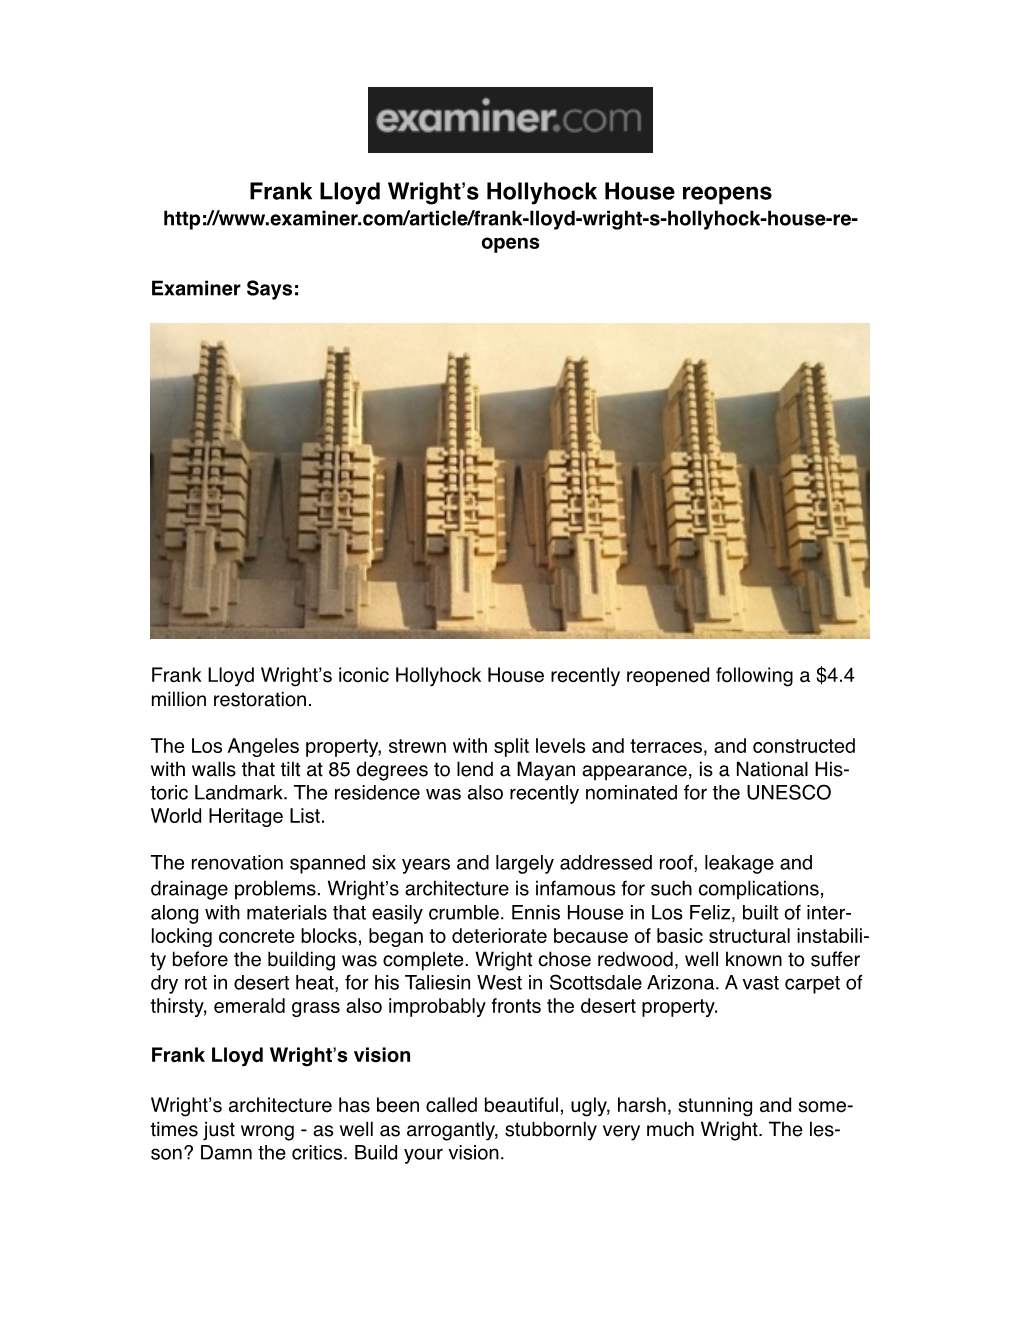 Frank Lloyd Wright's Hollyhock House Reopens